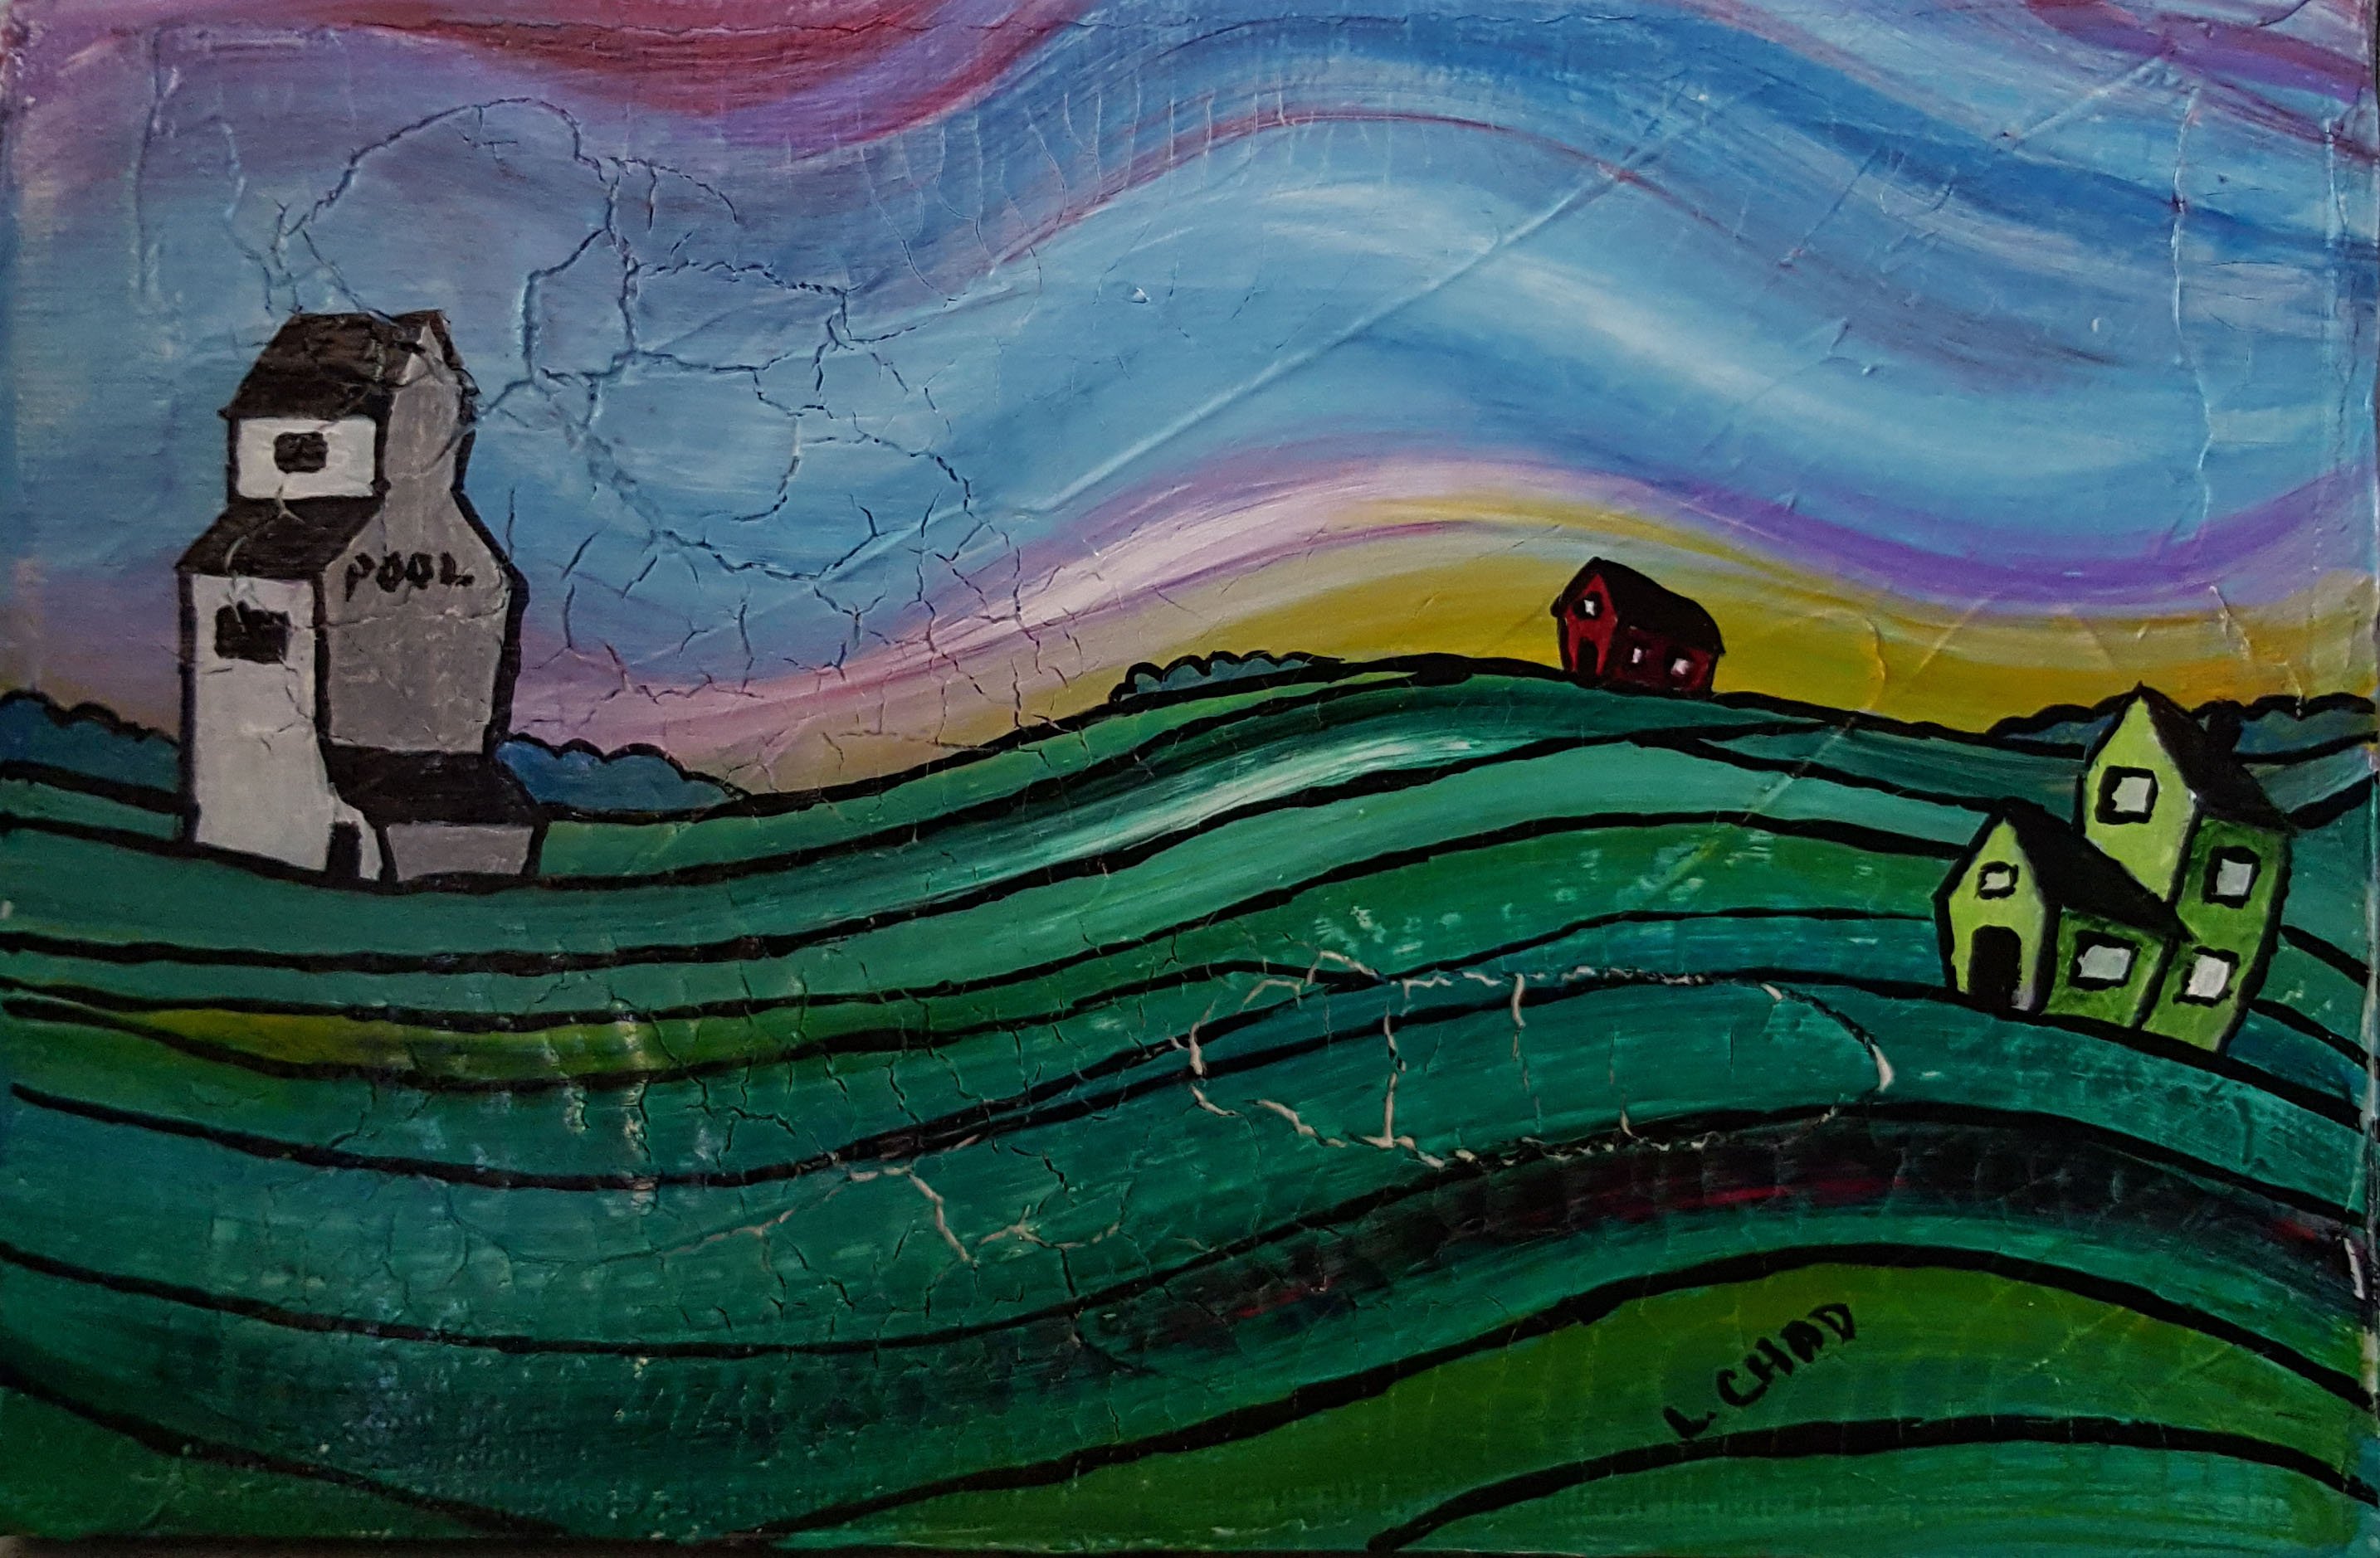 "Prairie Whimsy" [2015]
Acrylic on canvas. 7" x 4.75" (unframed with easel)
SOLD